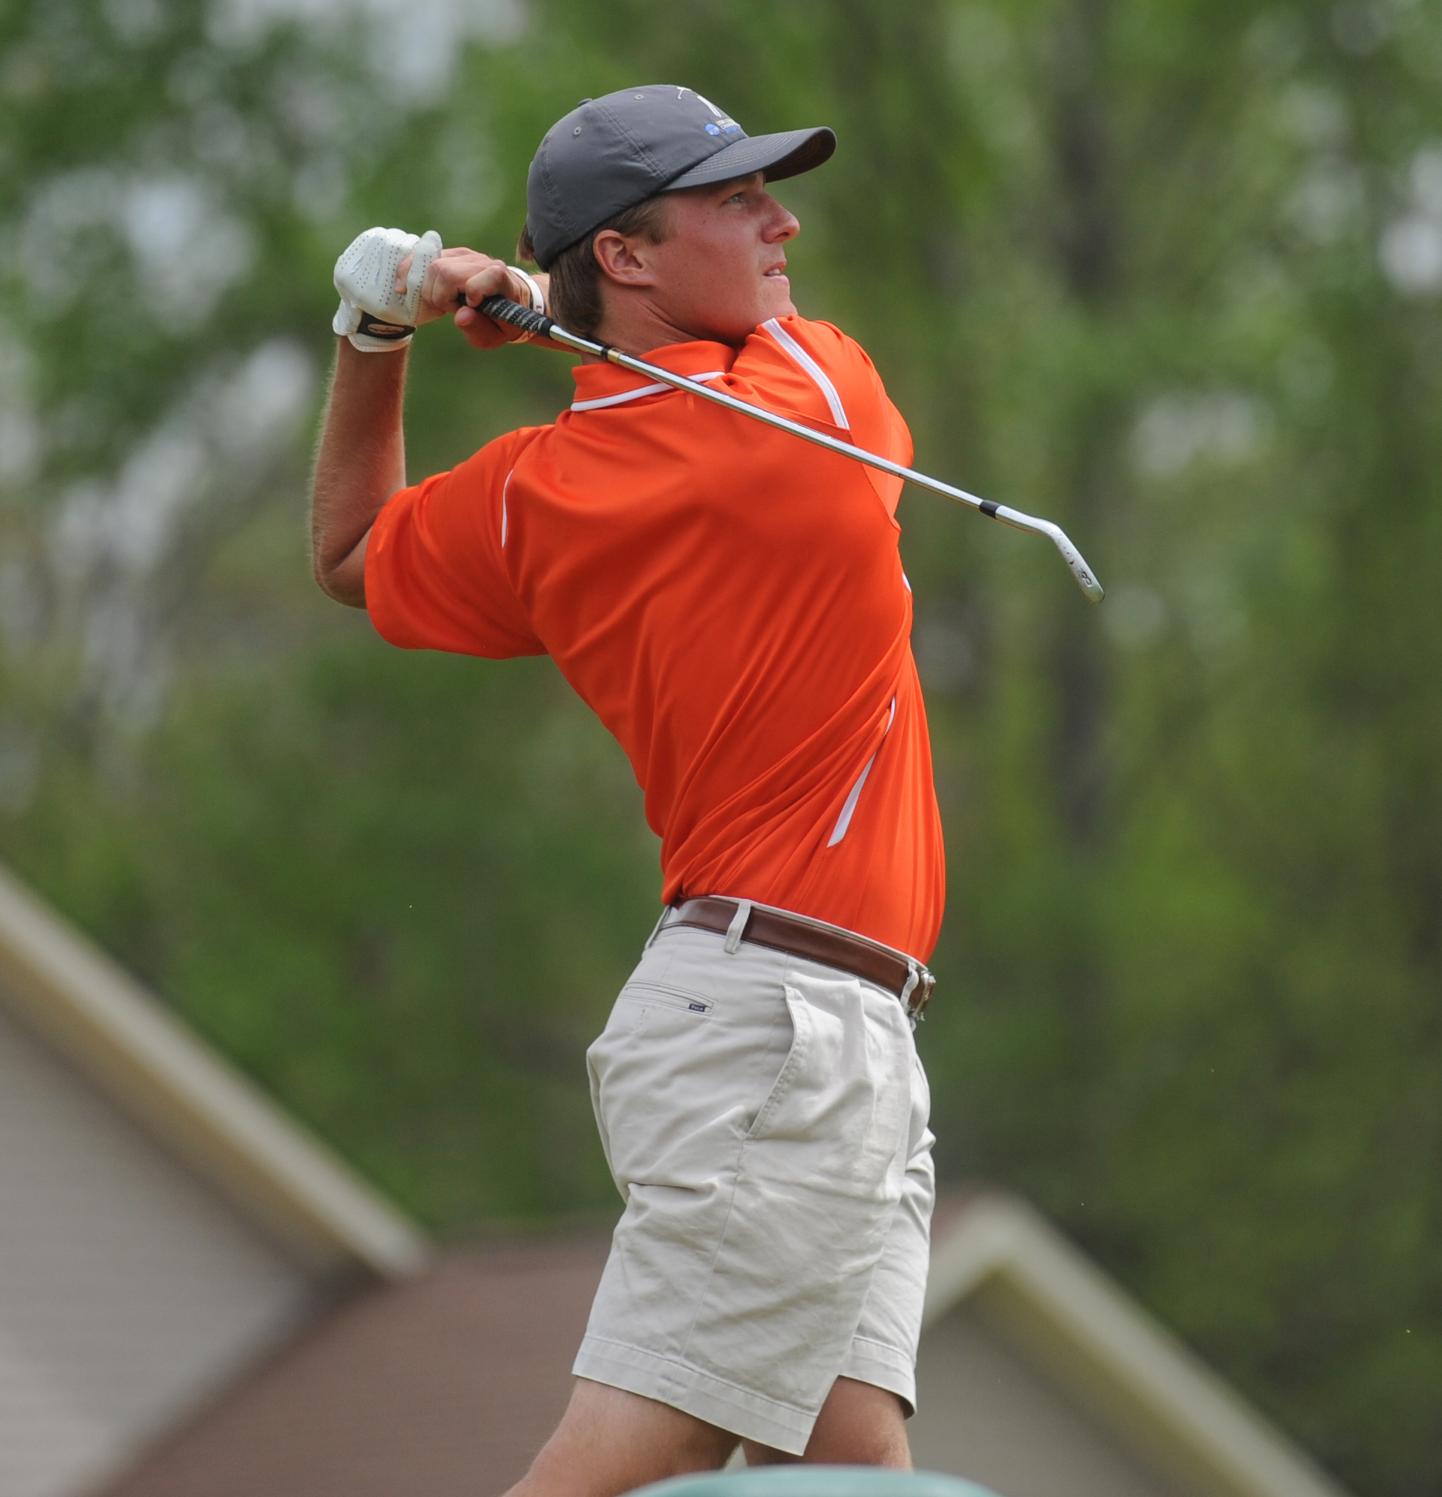 St. Leo Invitational in Tampa Starts Year for Men's Golf